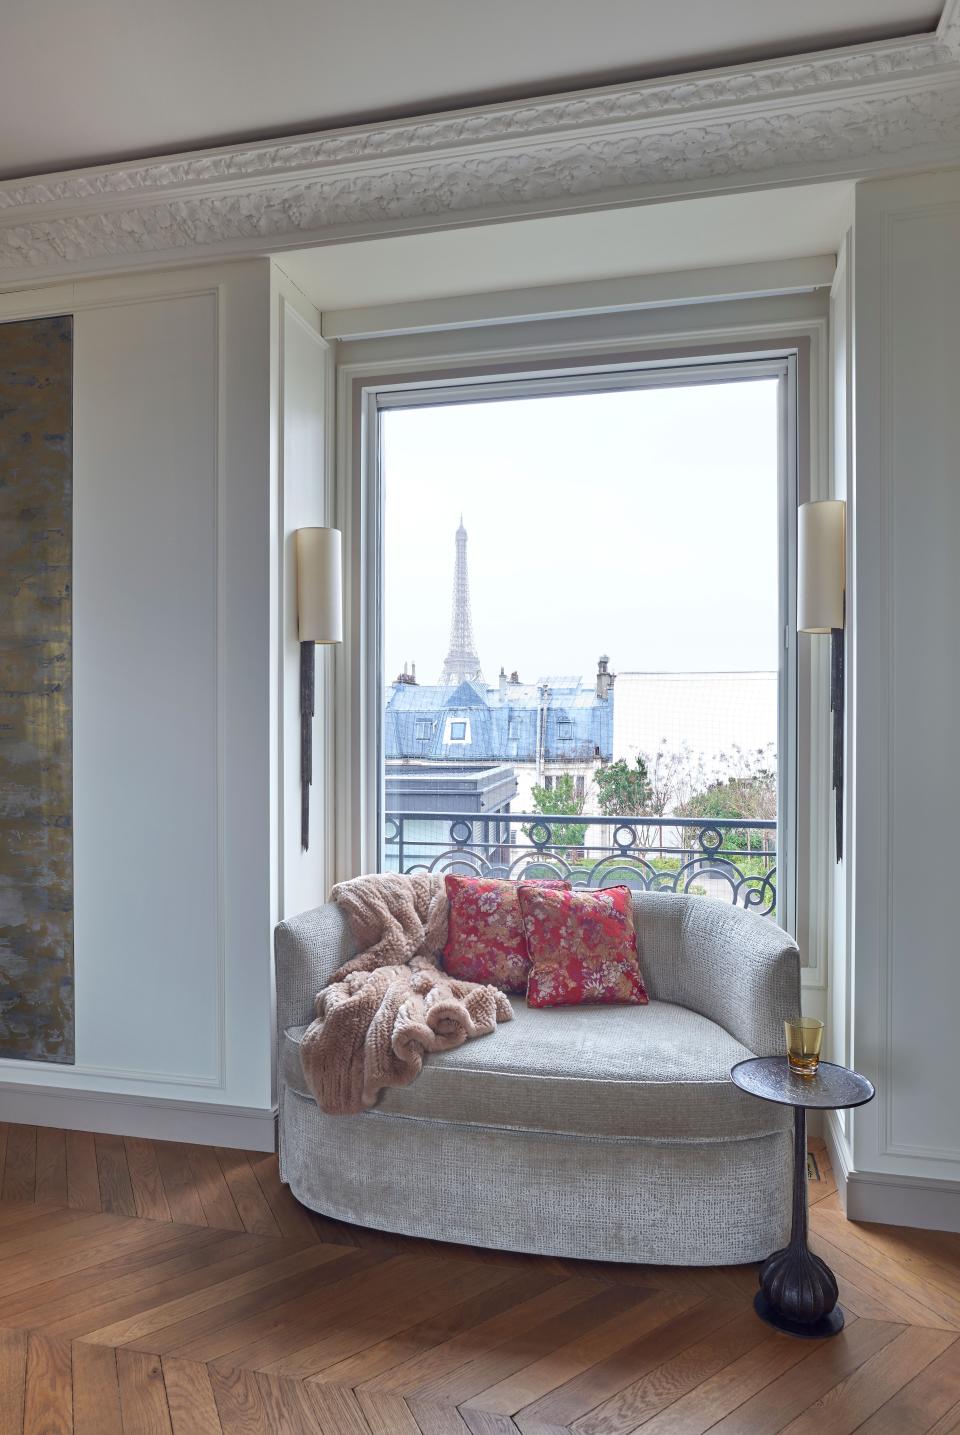 In  an American couple’s Paris pied-à-terre, designed by Benjamin Wood, a window was added to capture the view of the Eiffel Tower from the entrance. The custom window seat is in Sahco fabric and the custom moldings were designed by architect Sandrine Teze-Limal and Staff Espace Volume to hide all of the air-conditioning, heating, and vents throughout the apartment.